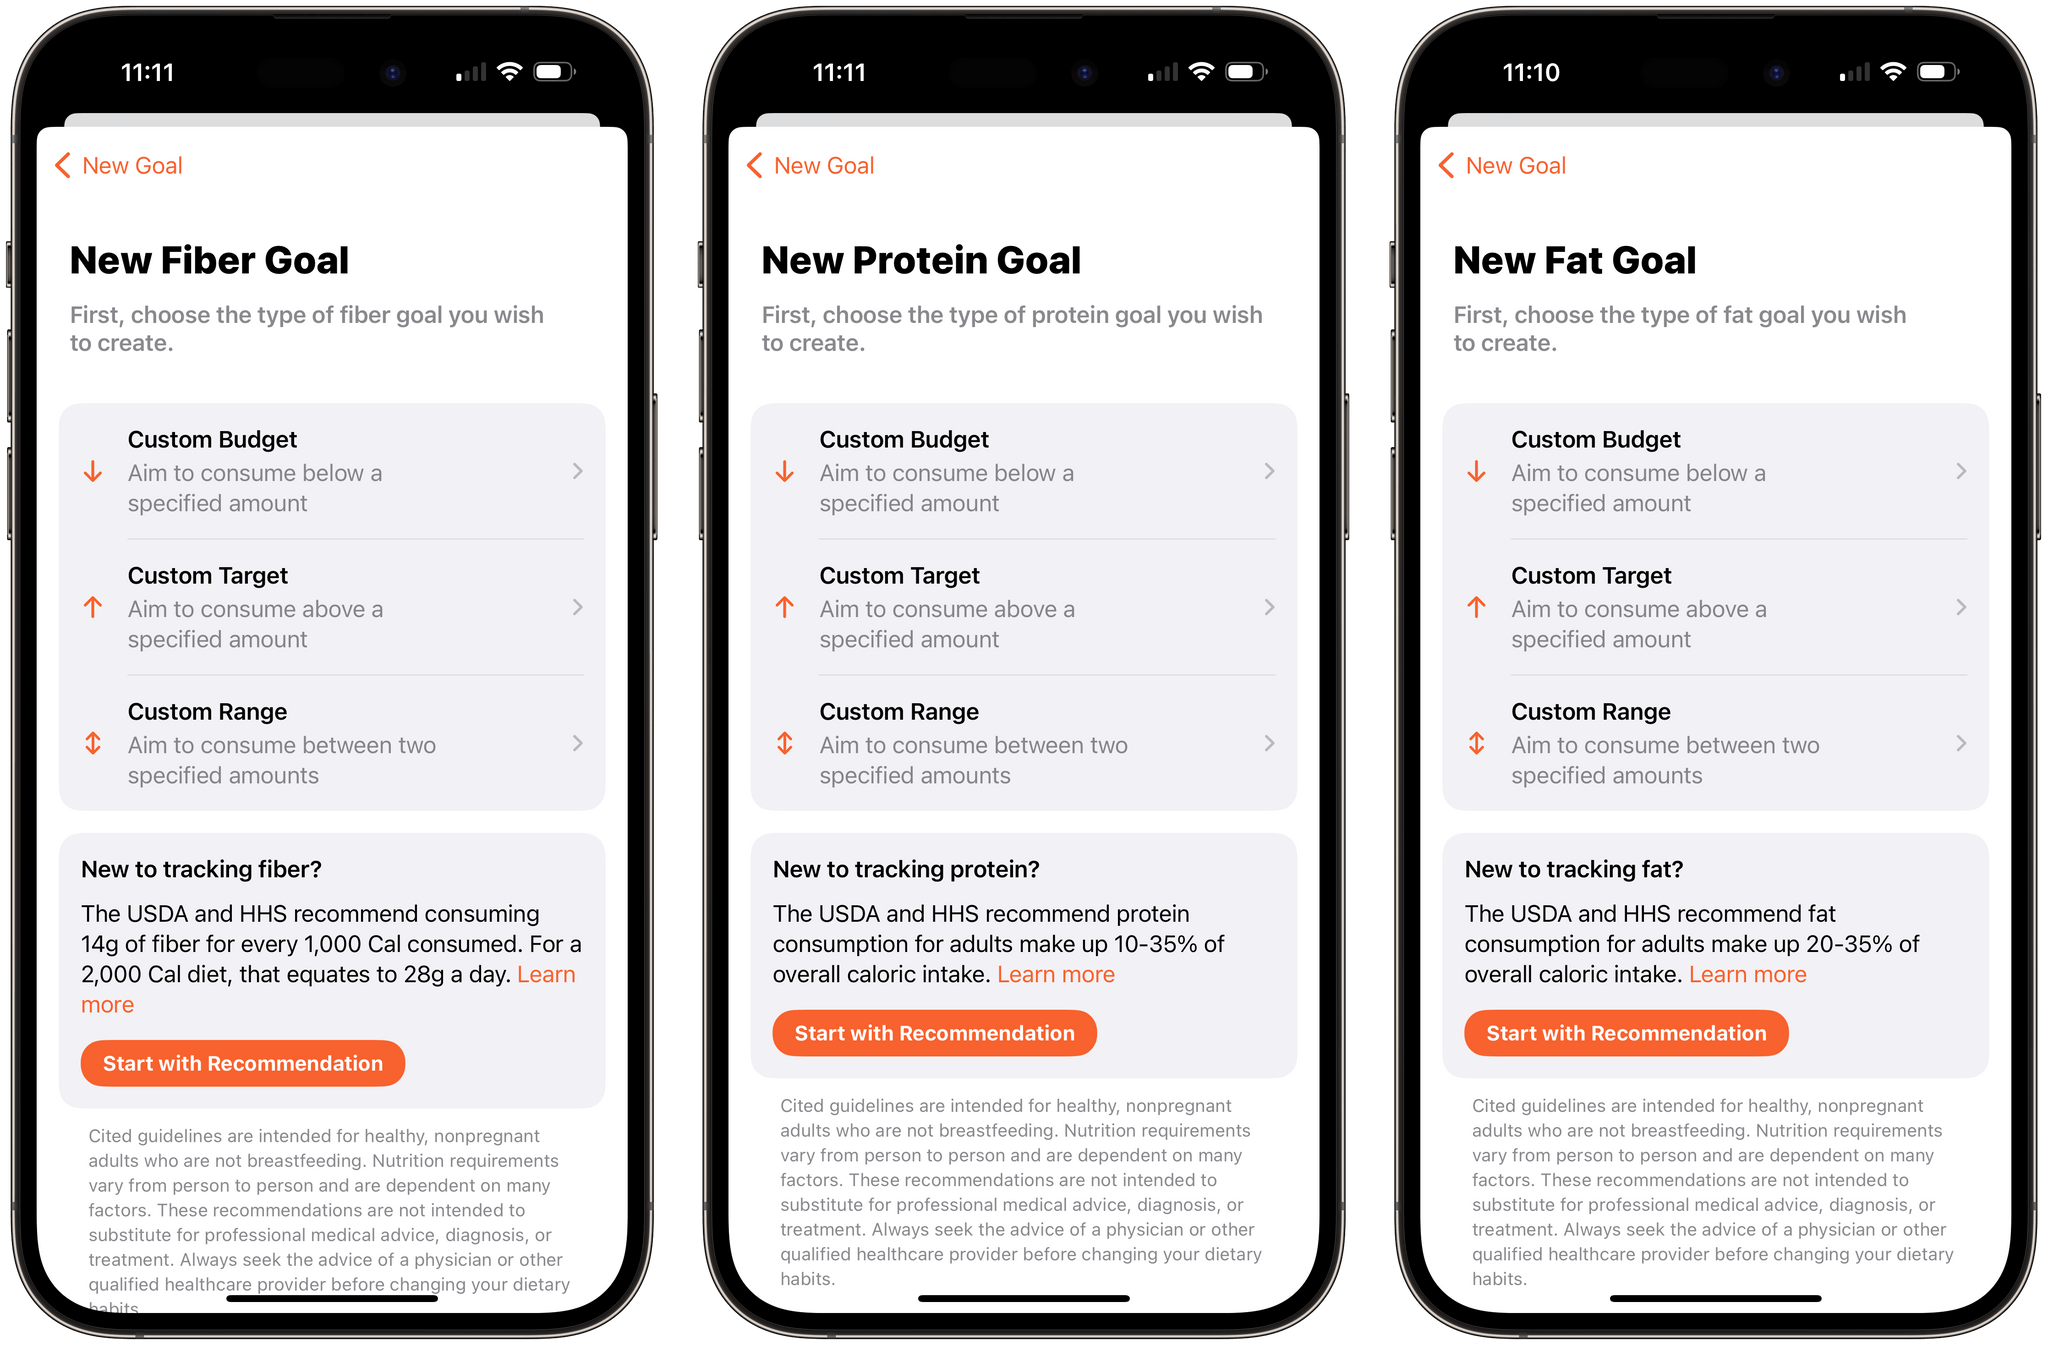 If you don't know where to start with setting goals, FoodNoms 2 has suggestions for macro goals based on US government guidelines.